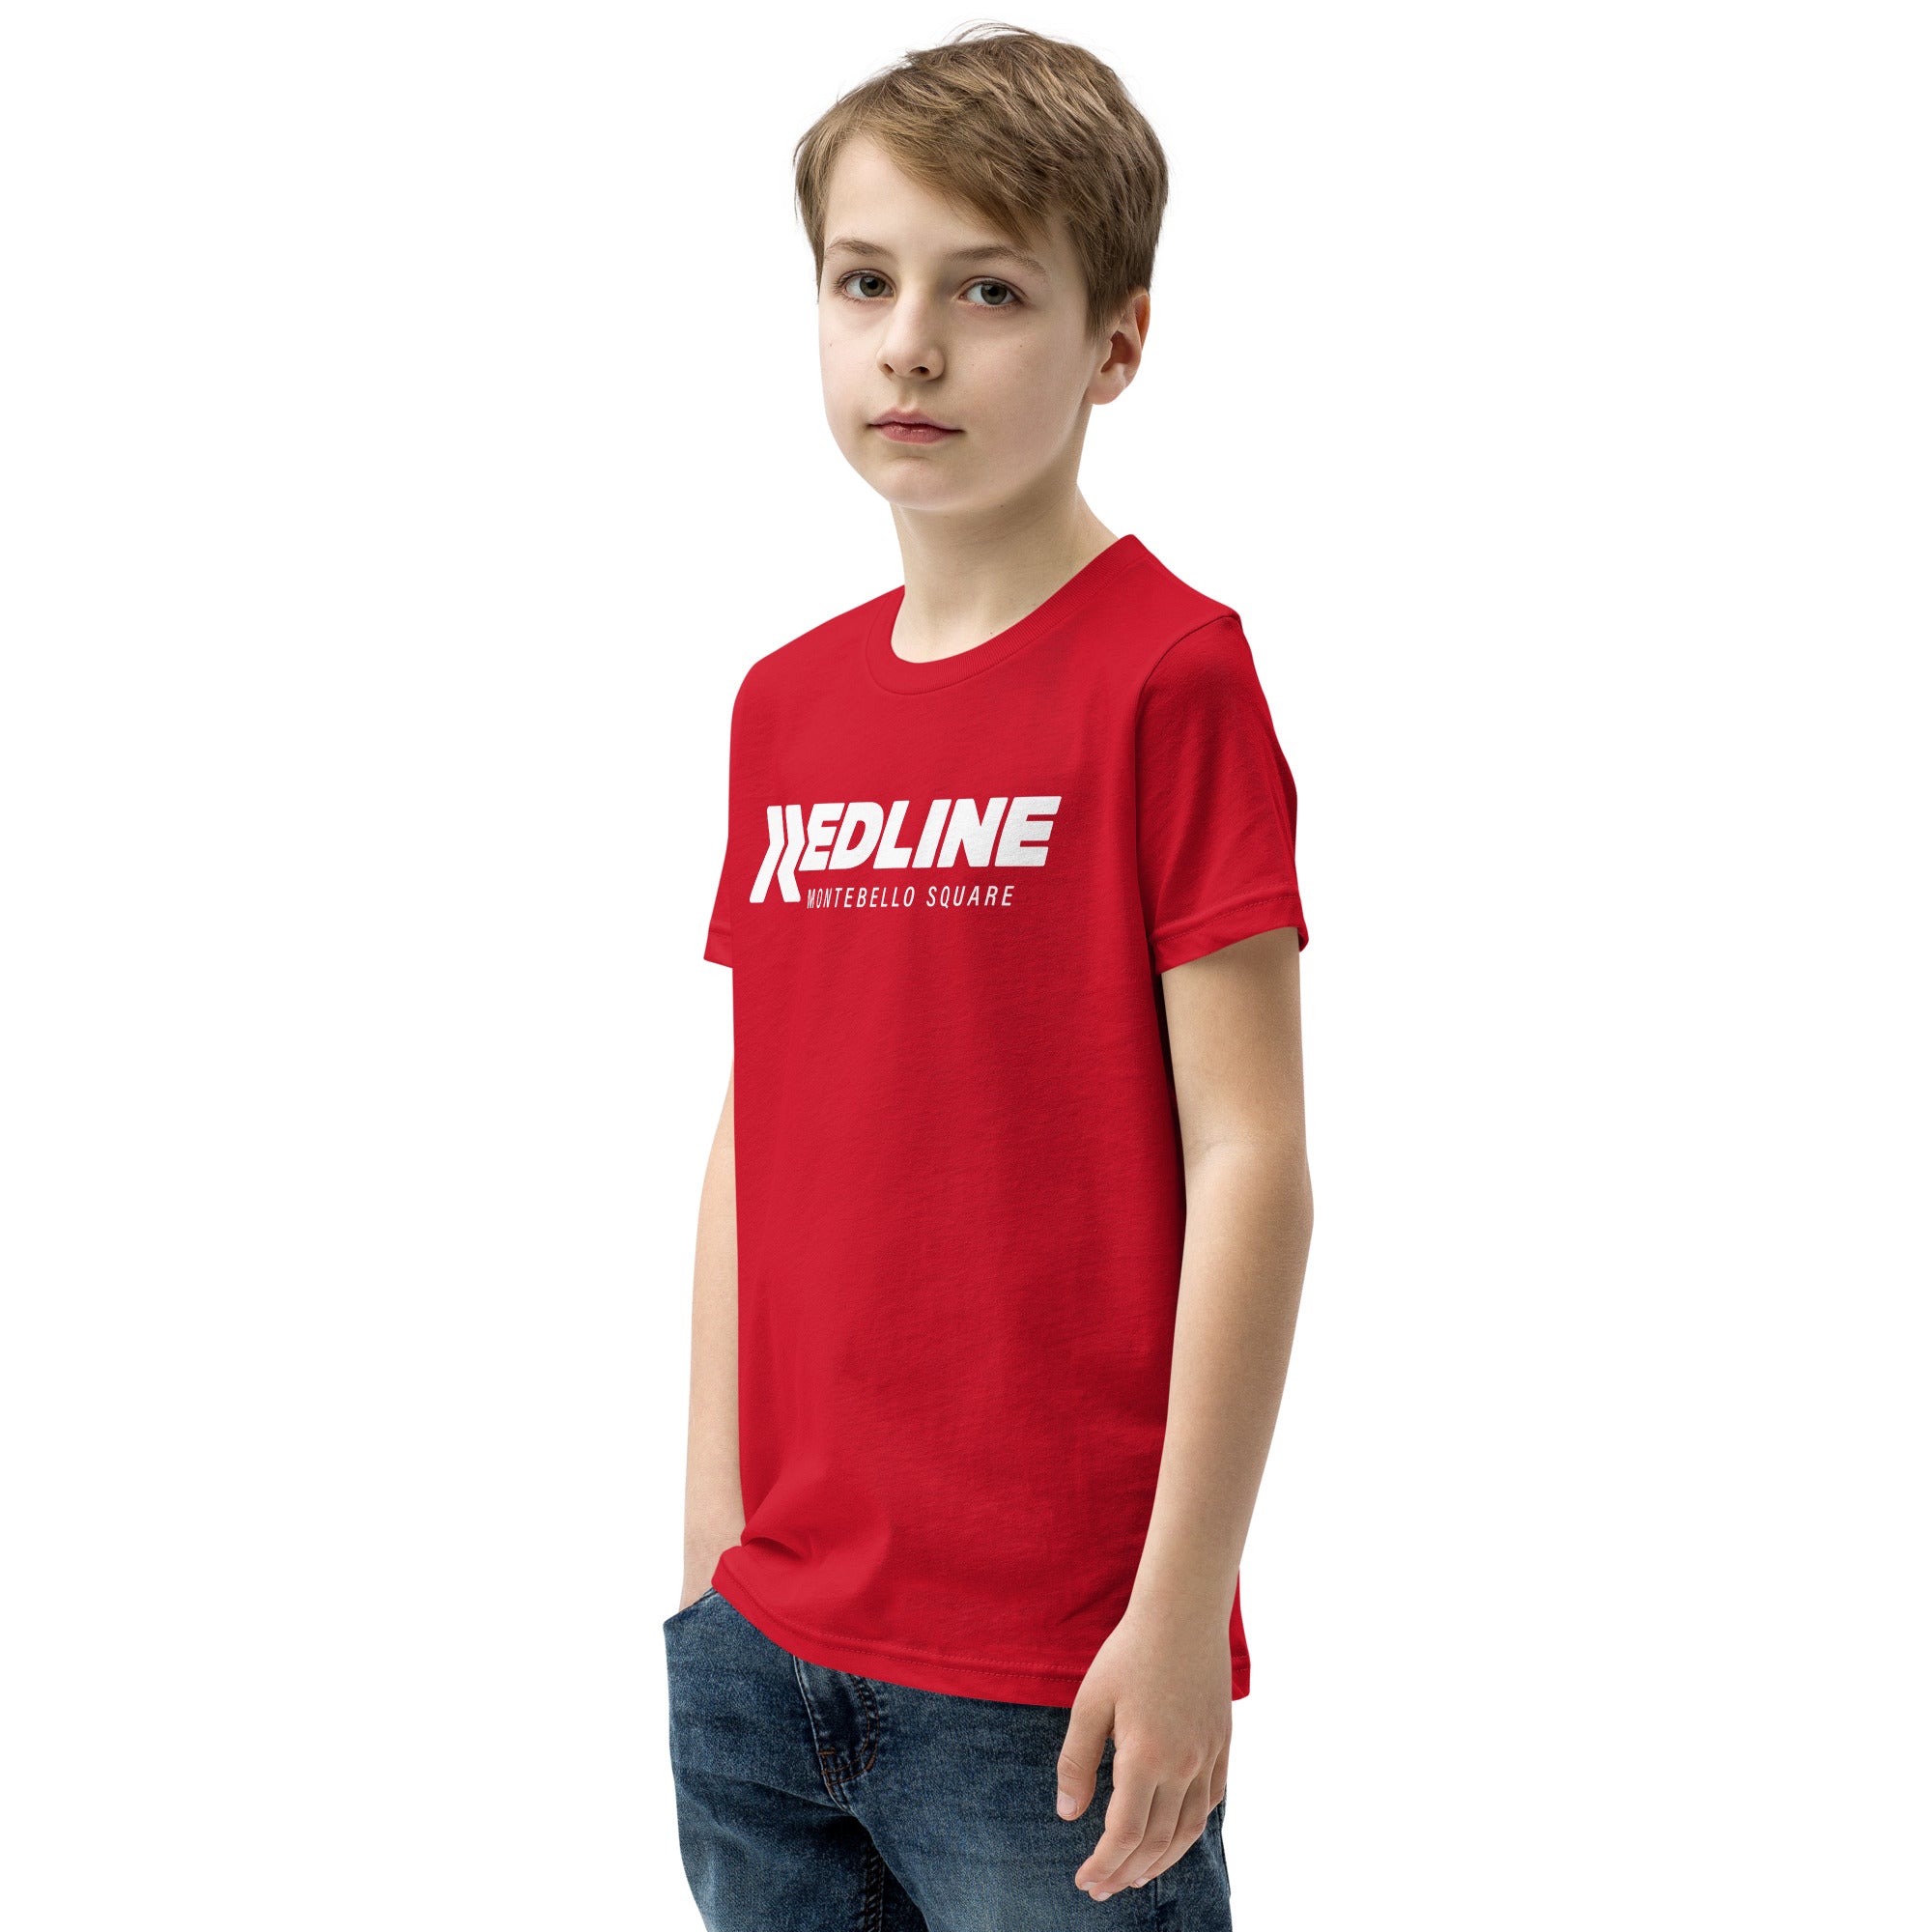 Montebello Square Logo W - Red Youth Short Sleeve T-Shirt